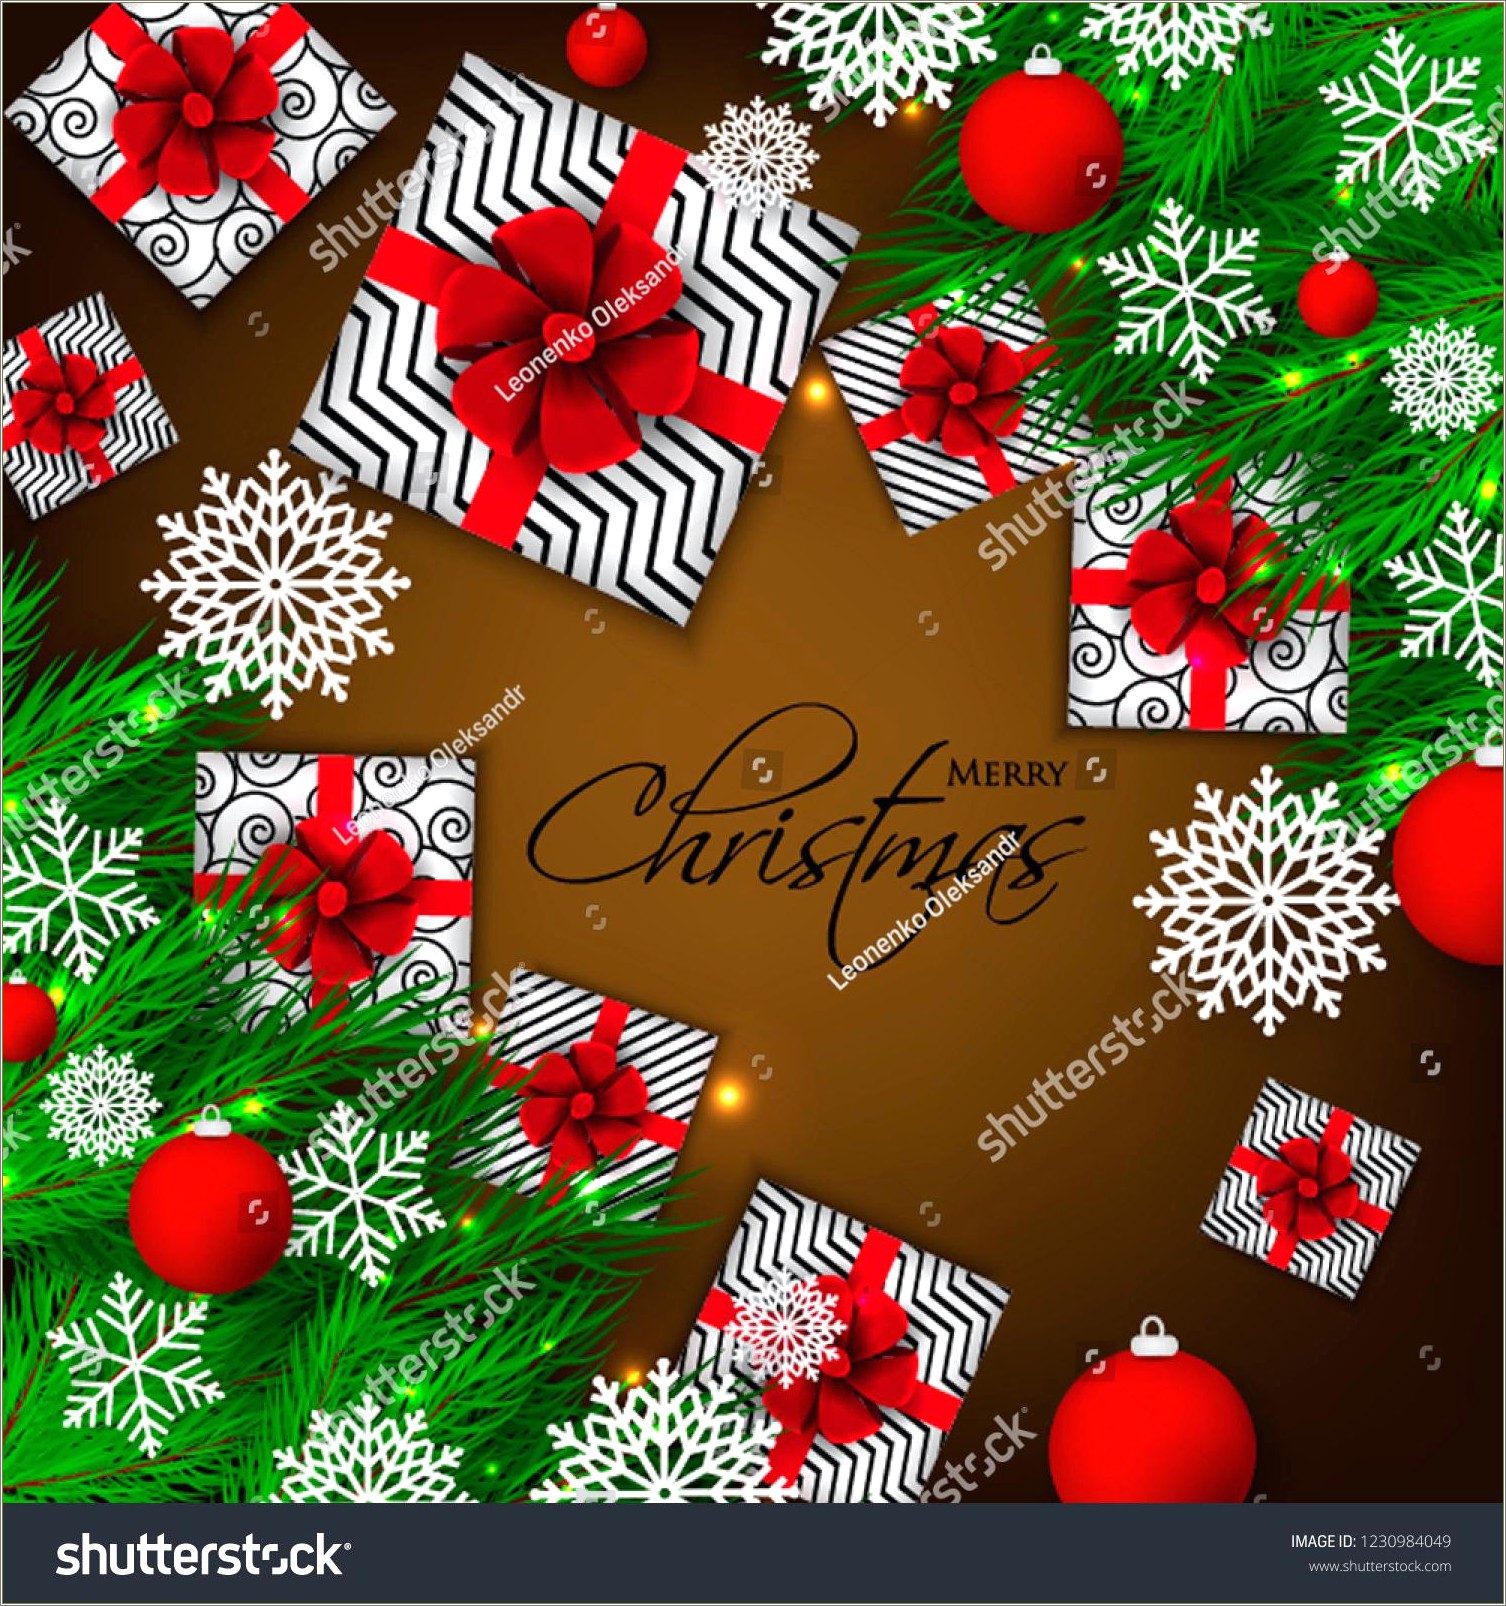 Christmas Party Invitation Card Template Free Download